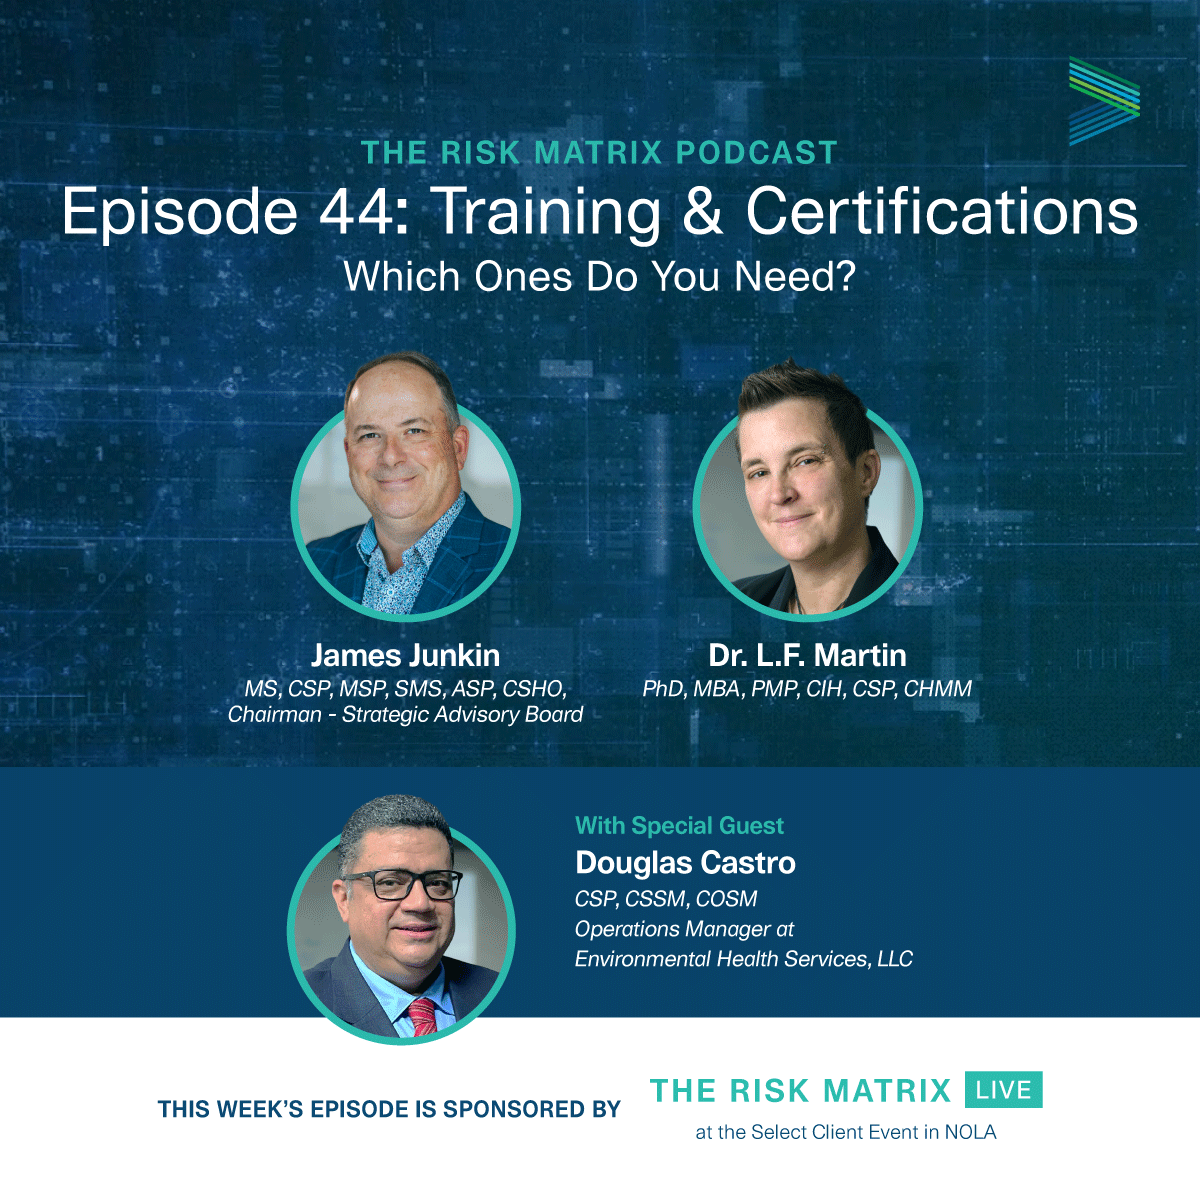 Your team has questions. The Risk Matrix has the answers. If your team has questions about their career and safety certifications, send the this now! Guest Douglas Castro, CPT, CIT, ESGP, CSP is talking certs and answering all the questions: open.spotify.com/episode/3a1pbx…